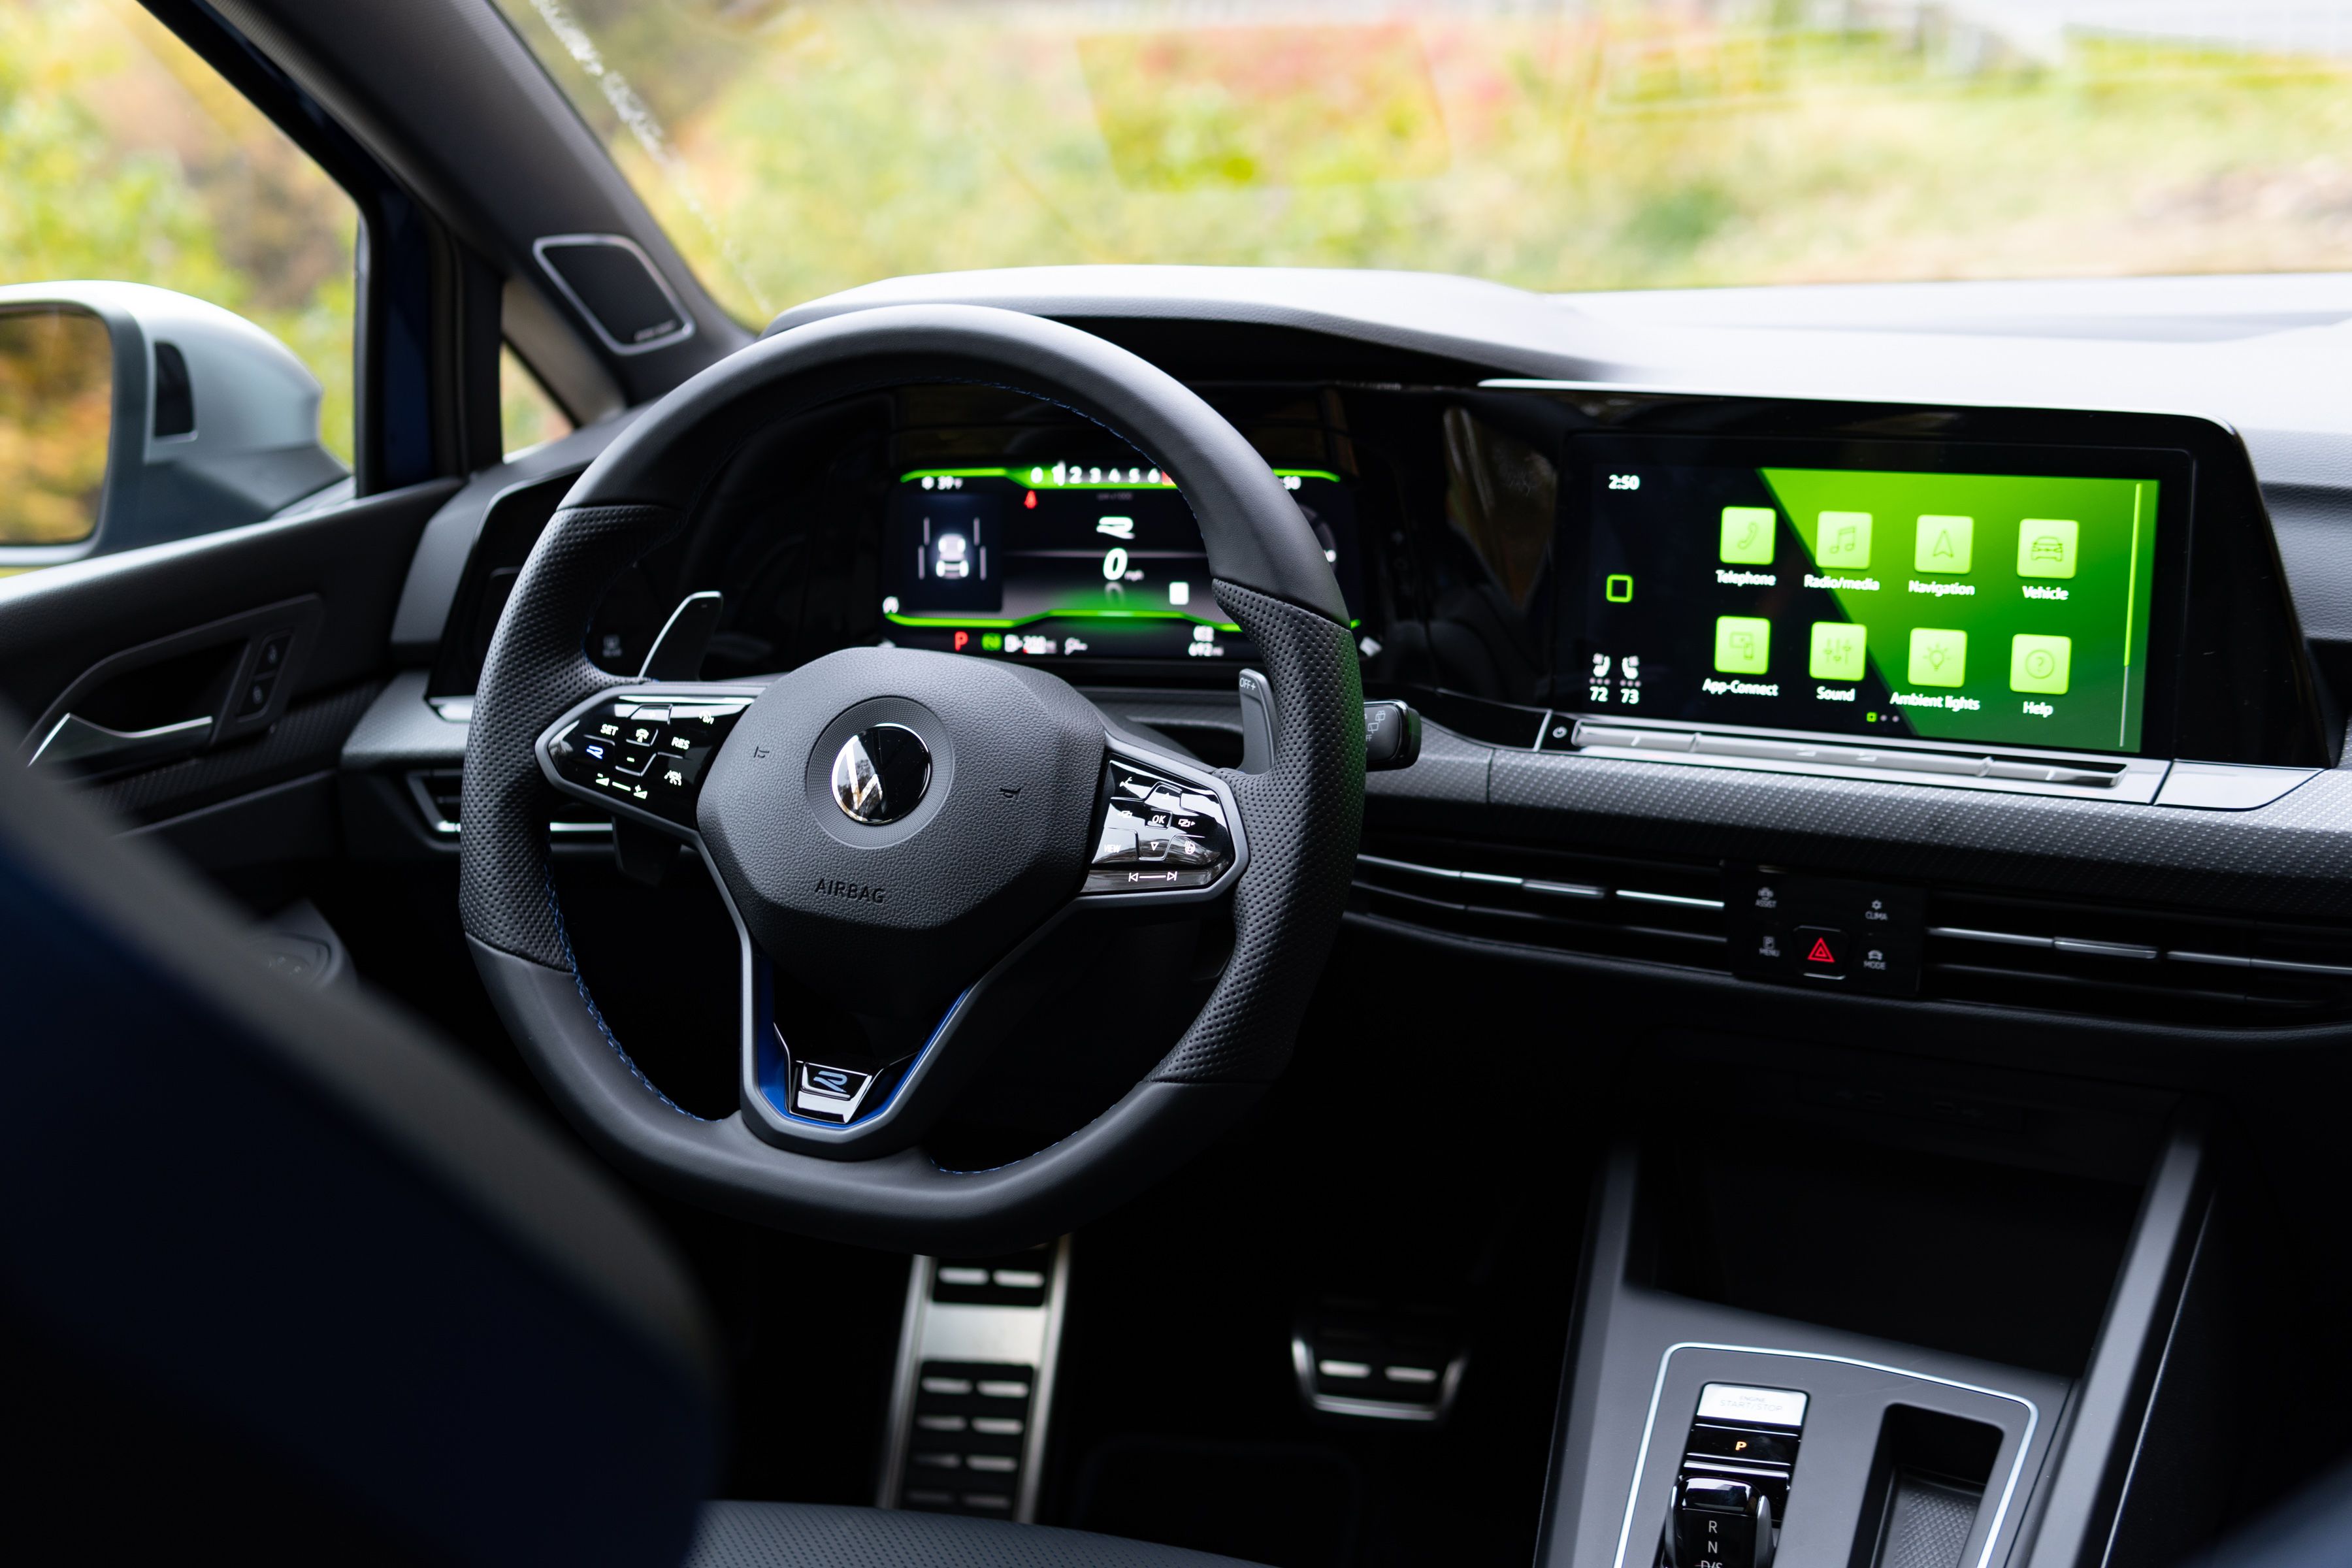 Volkswagen Says Its Capacitive Touch Buttons Will Be Replaced Starting Next Year